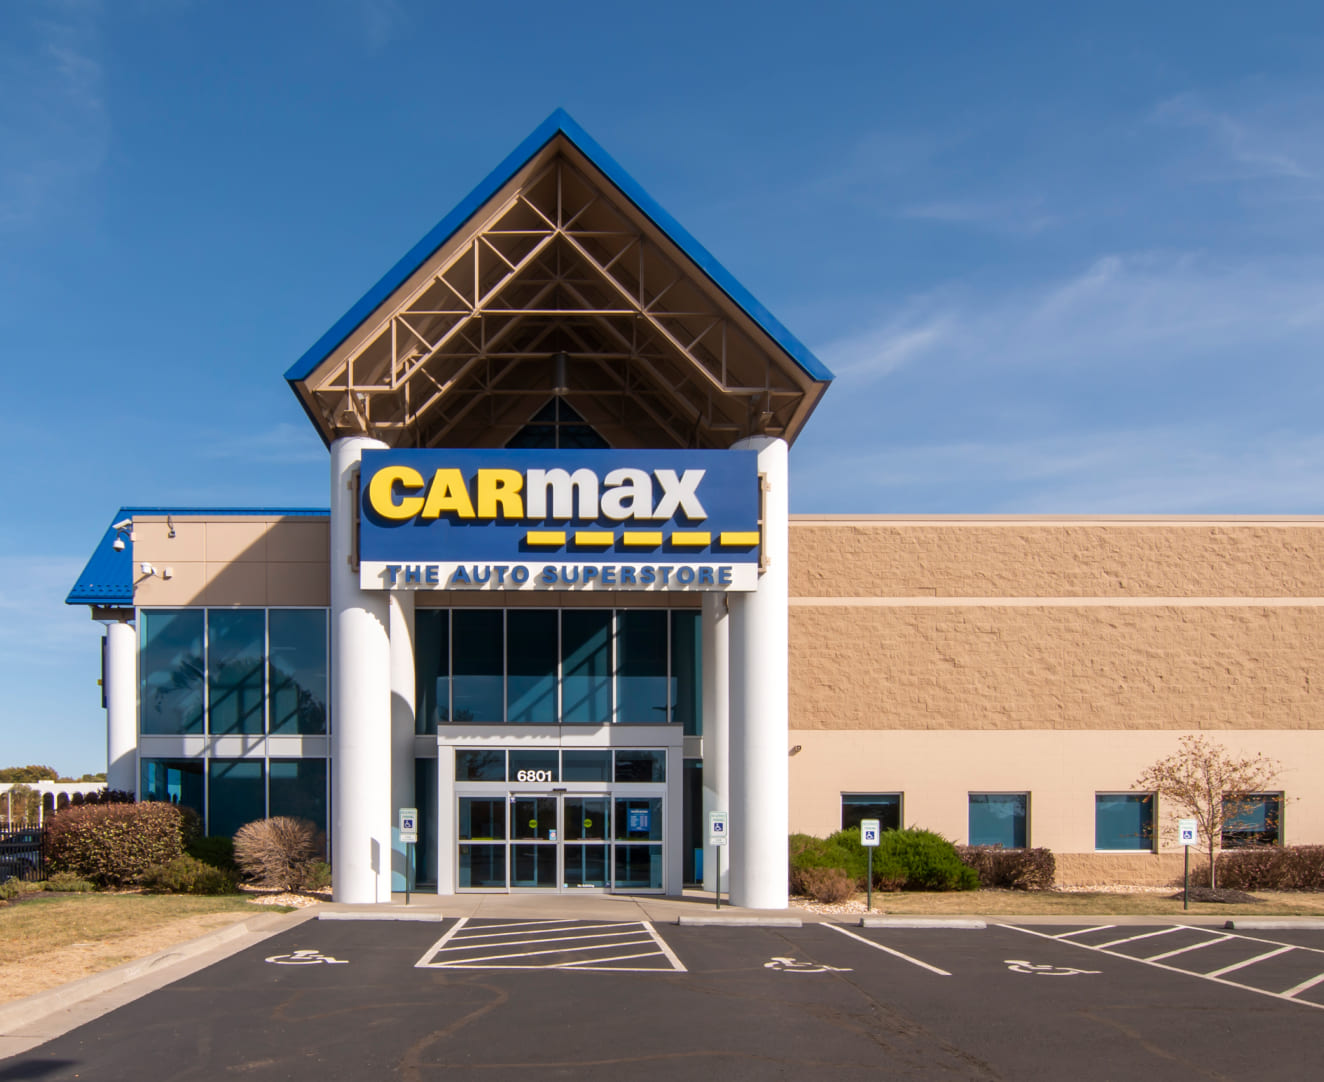 The front entrance of the CarMax at 6801 E. Frontage Road in Overland Park, KS.